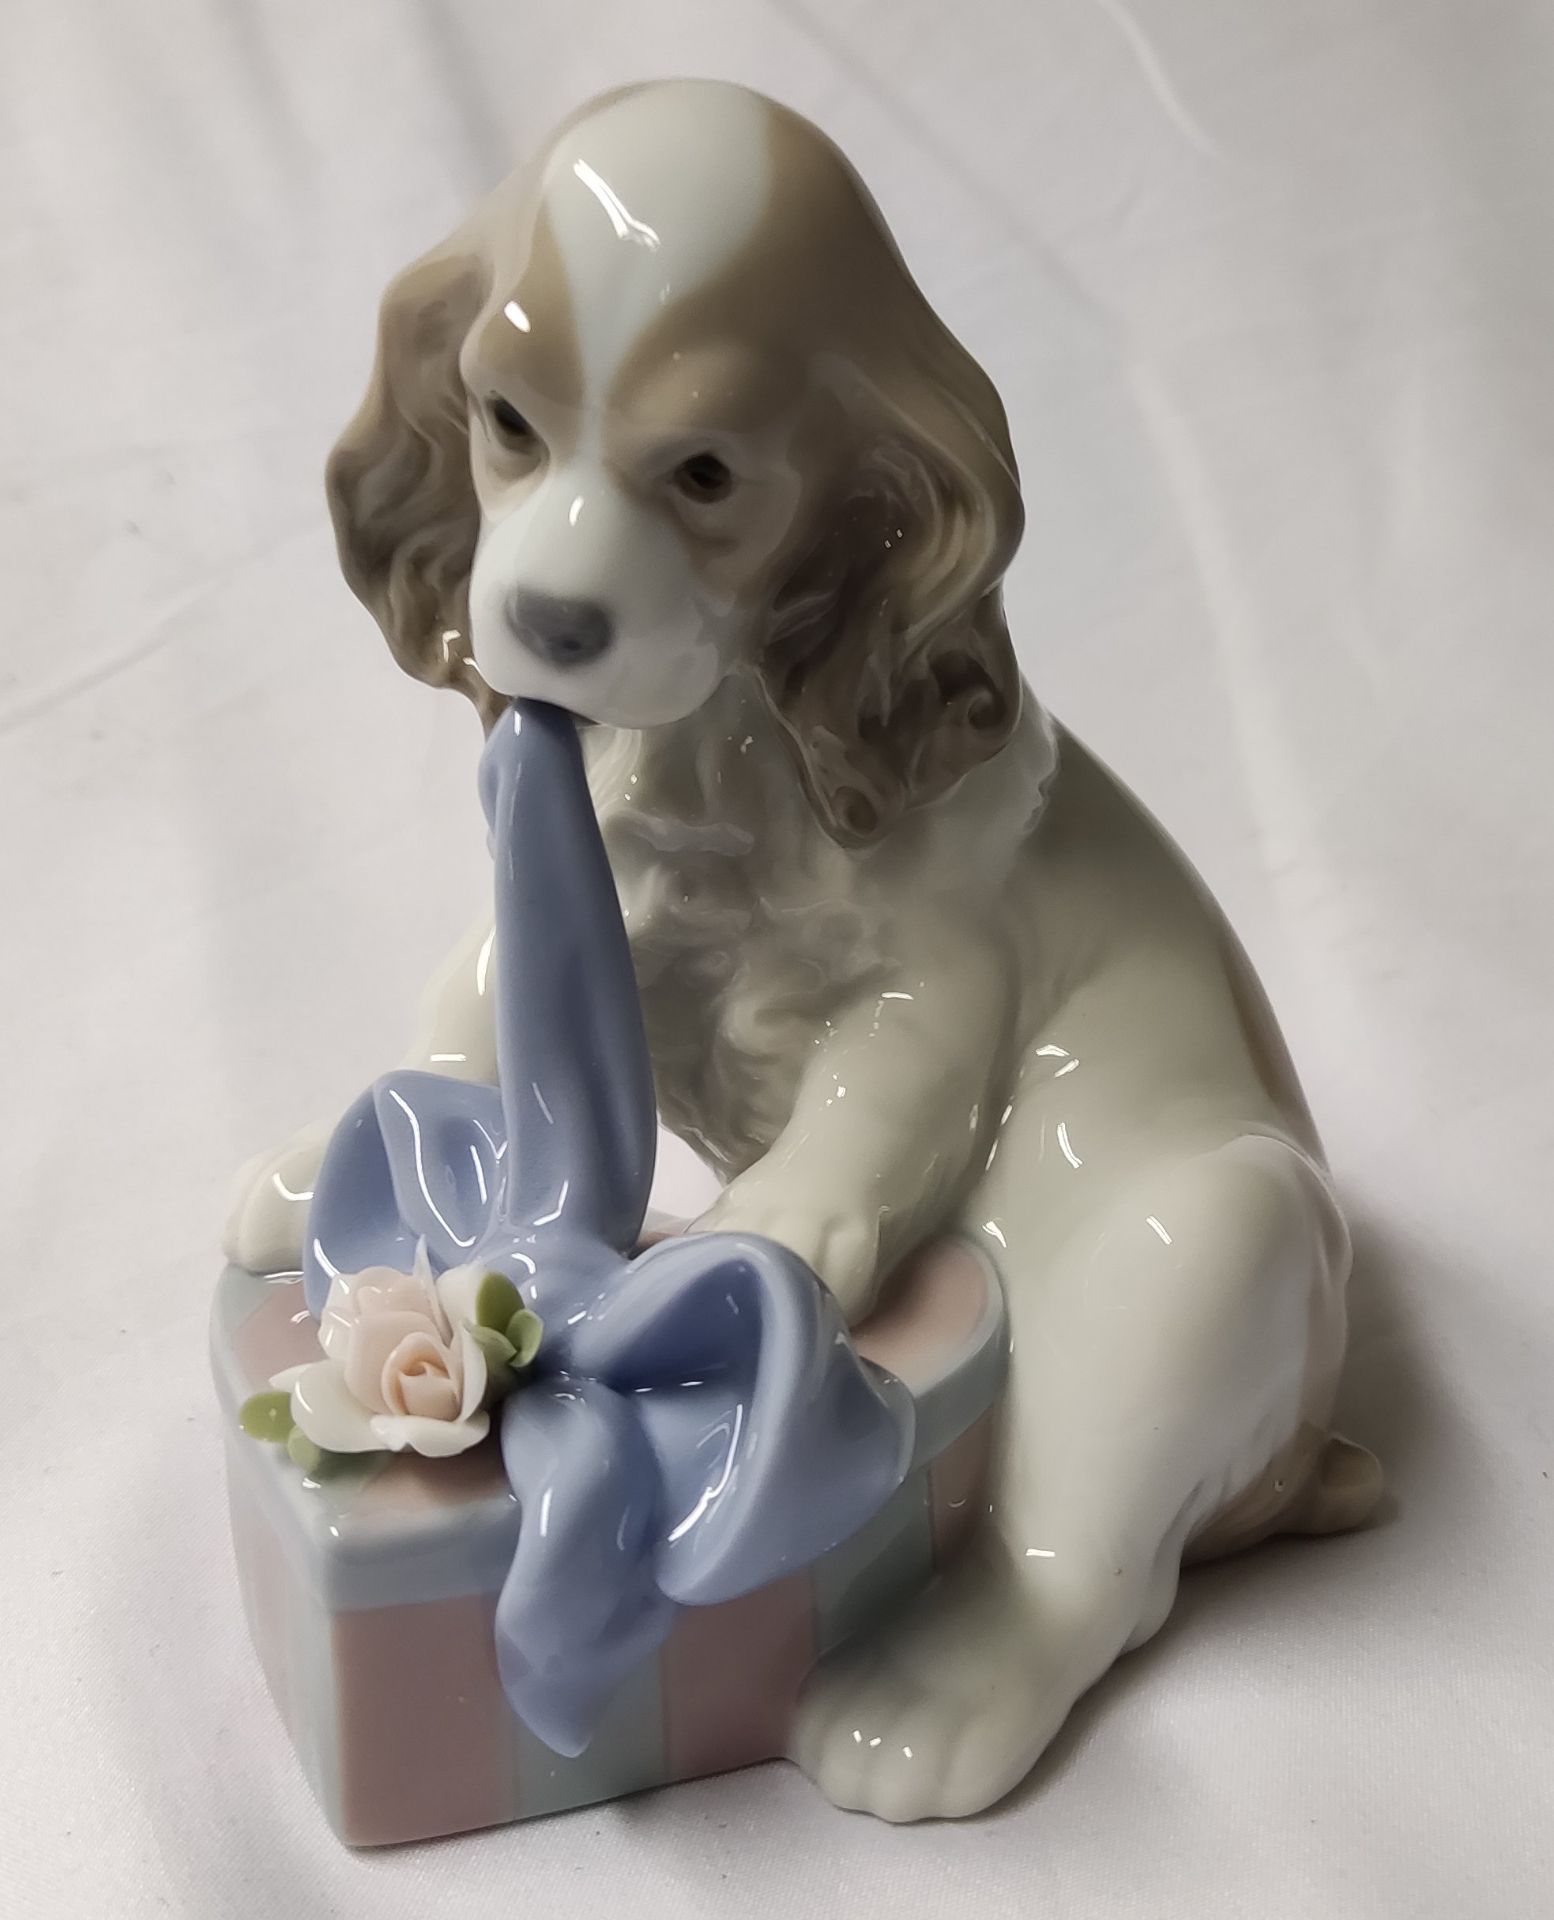 1 x LLADRO Can't Wait Puppy Dog Porcelain Figurine - New/Boxed - RRP £330 - Ref: /HOC244/HC5 - CL987 - Image 2 of 22